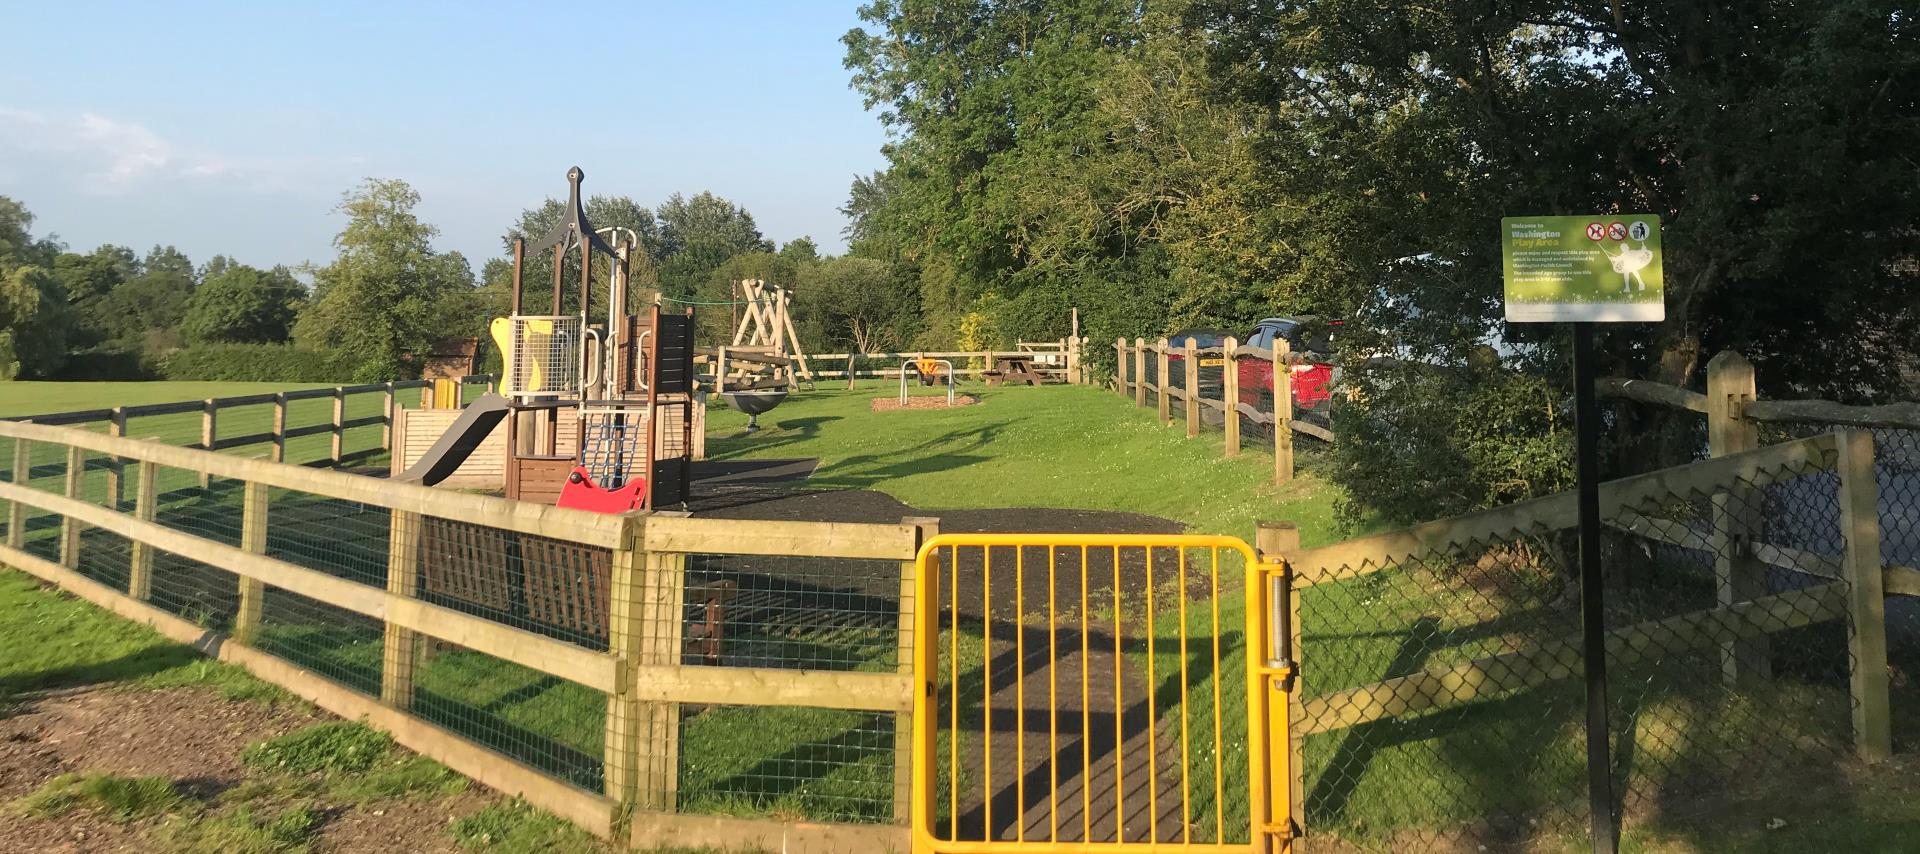 Recreation ground and play area